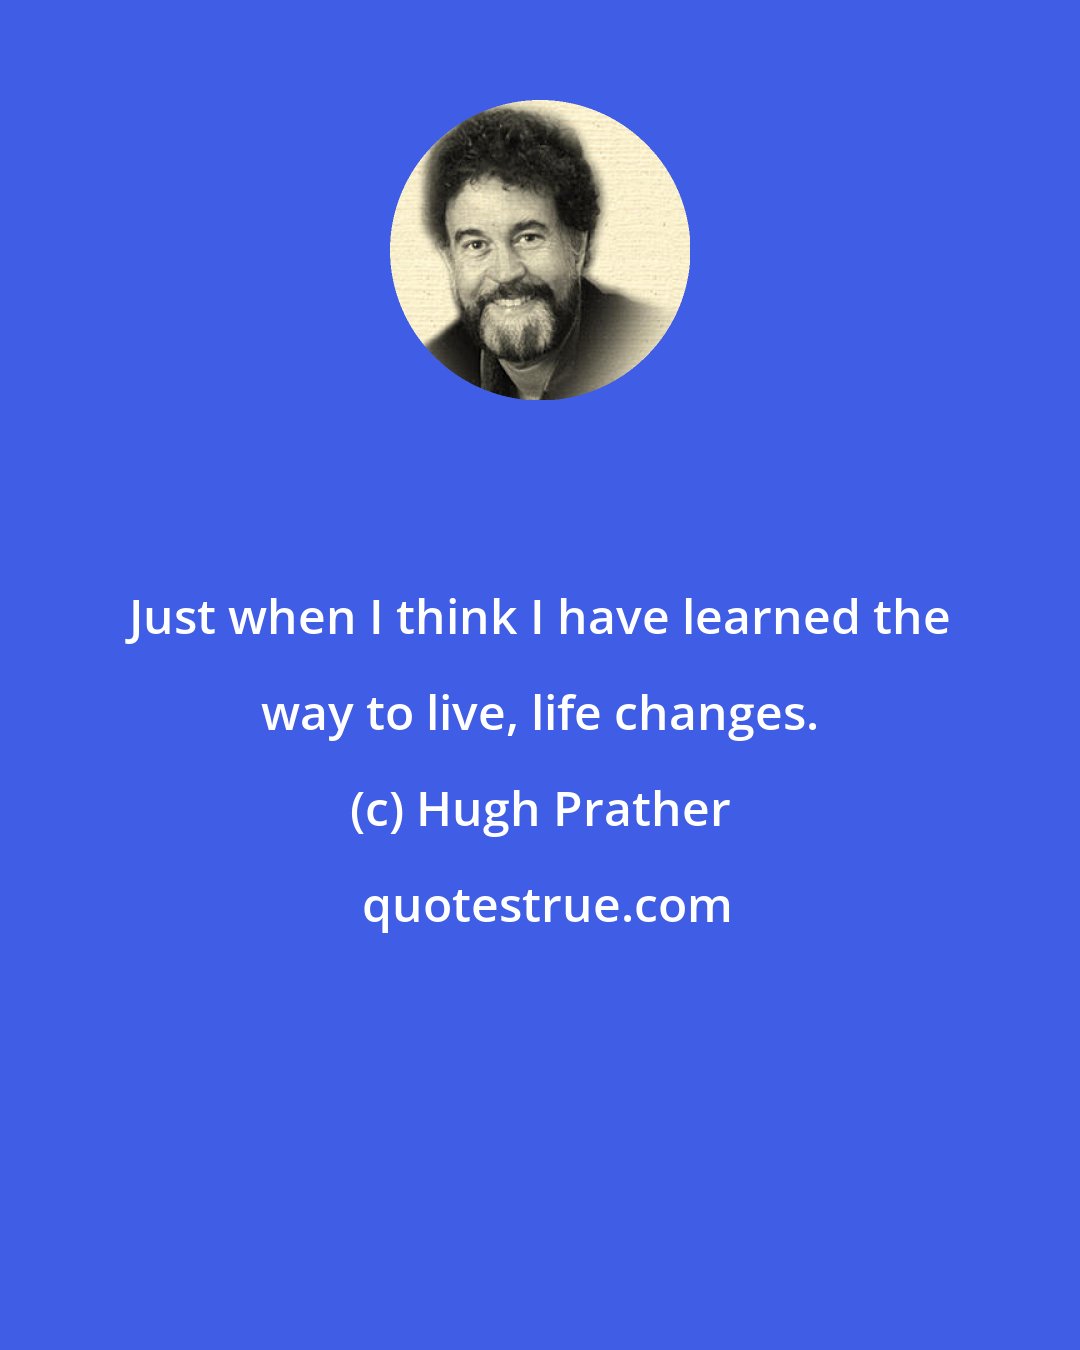 Hugh Prather: Just when I think I have learned the way to live, life changes.